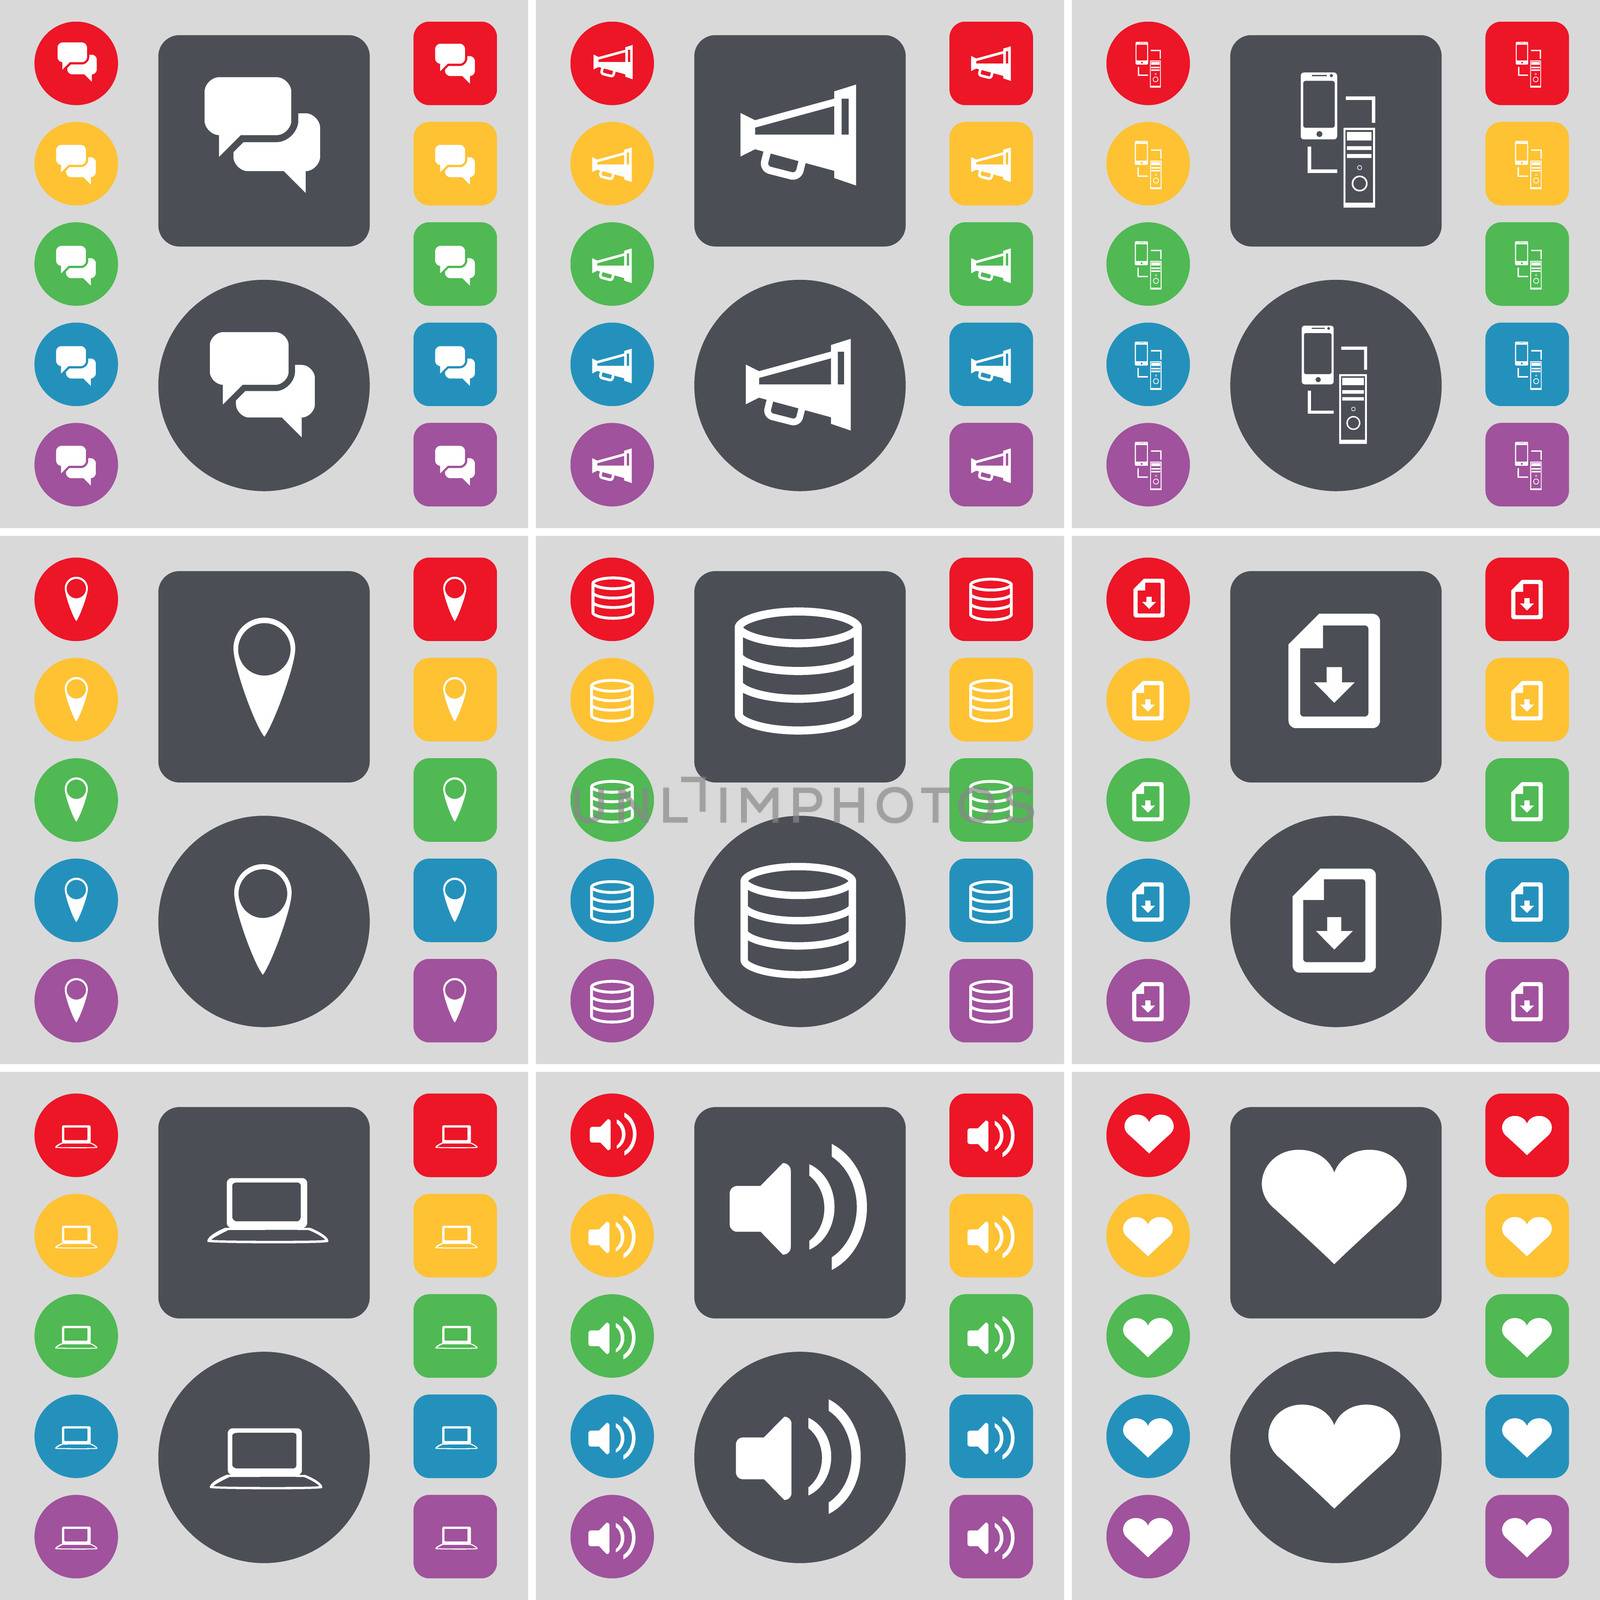 Chat, Megaphone, Connection, Checkpoint, Database, Download file, Laptop, Sound, Heart icon symbol. A large set of flat, colored buttons for your design.  by serhii_lohvyniuk